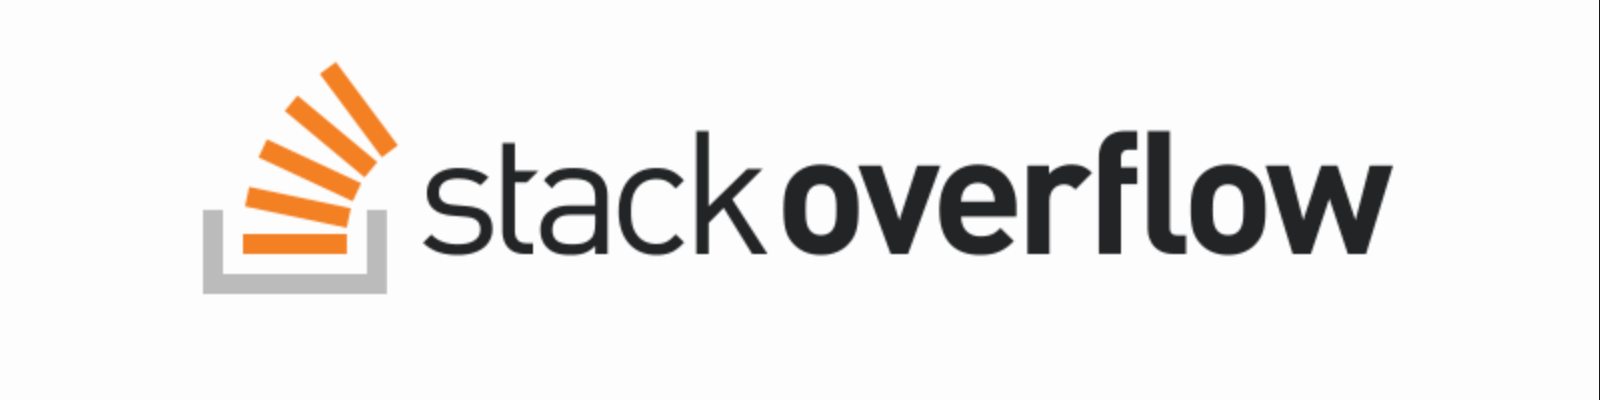 What's wrong with StackOverflow